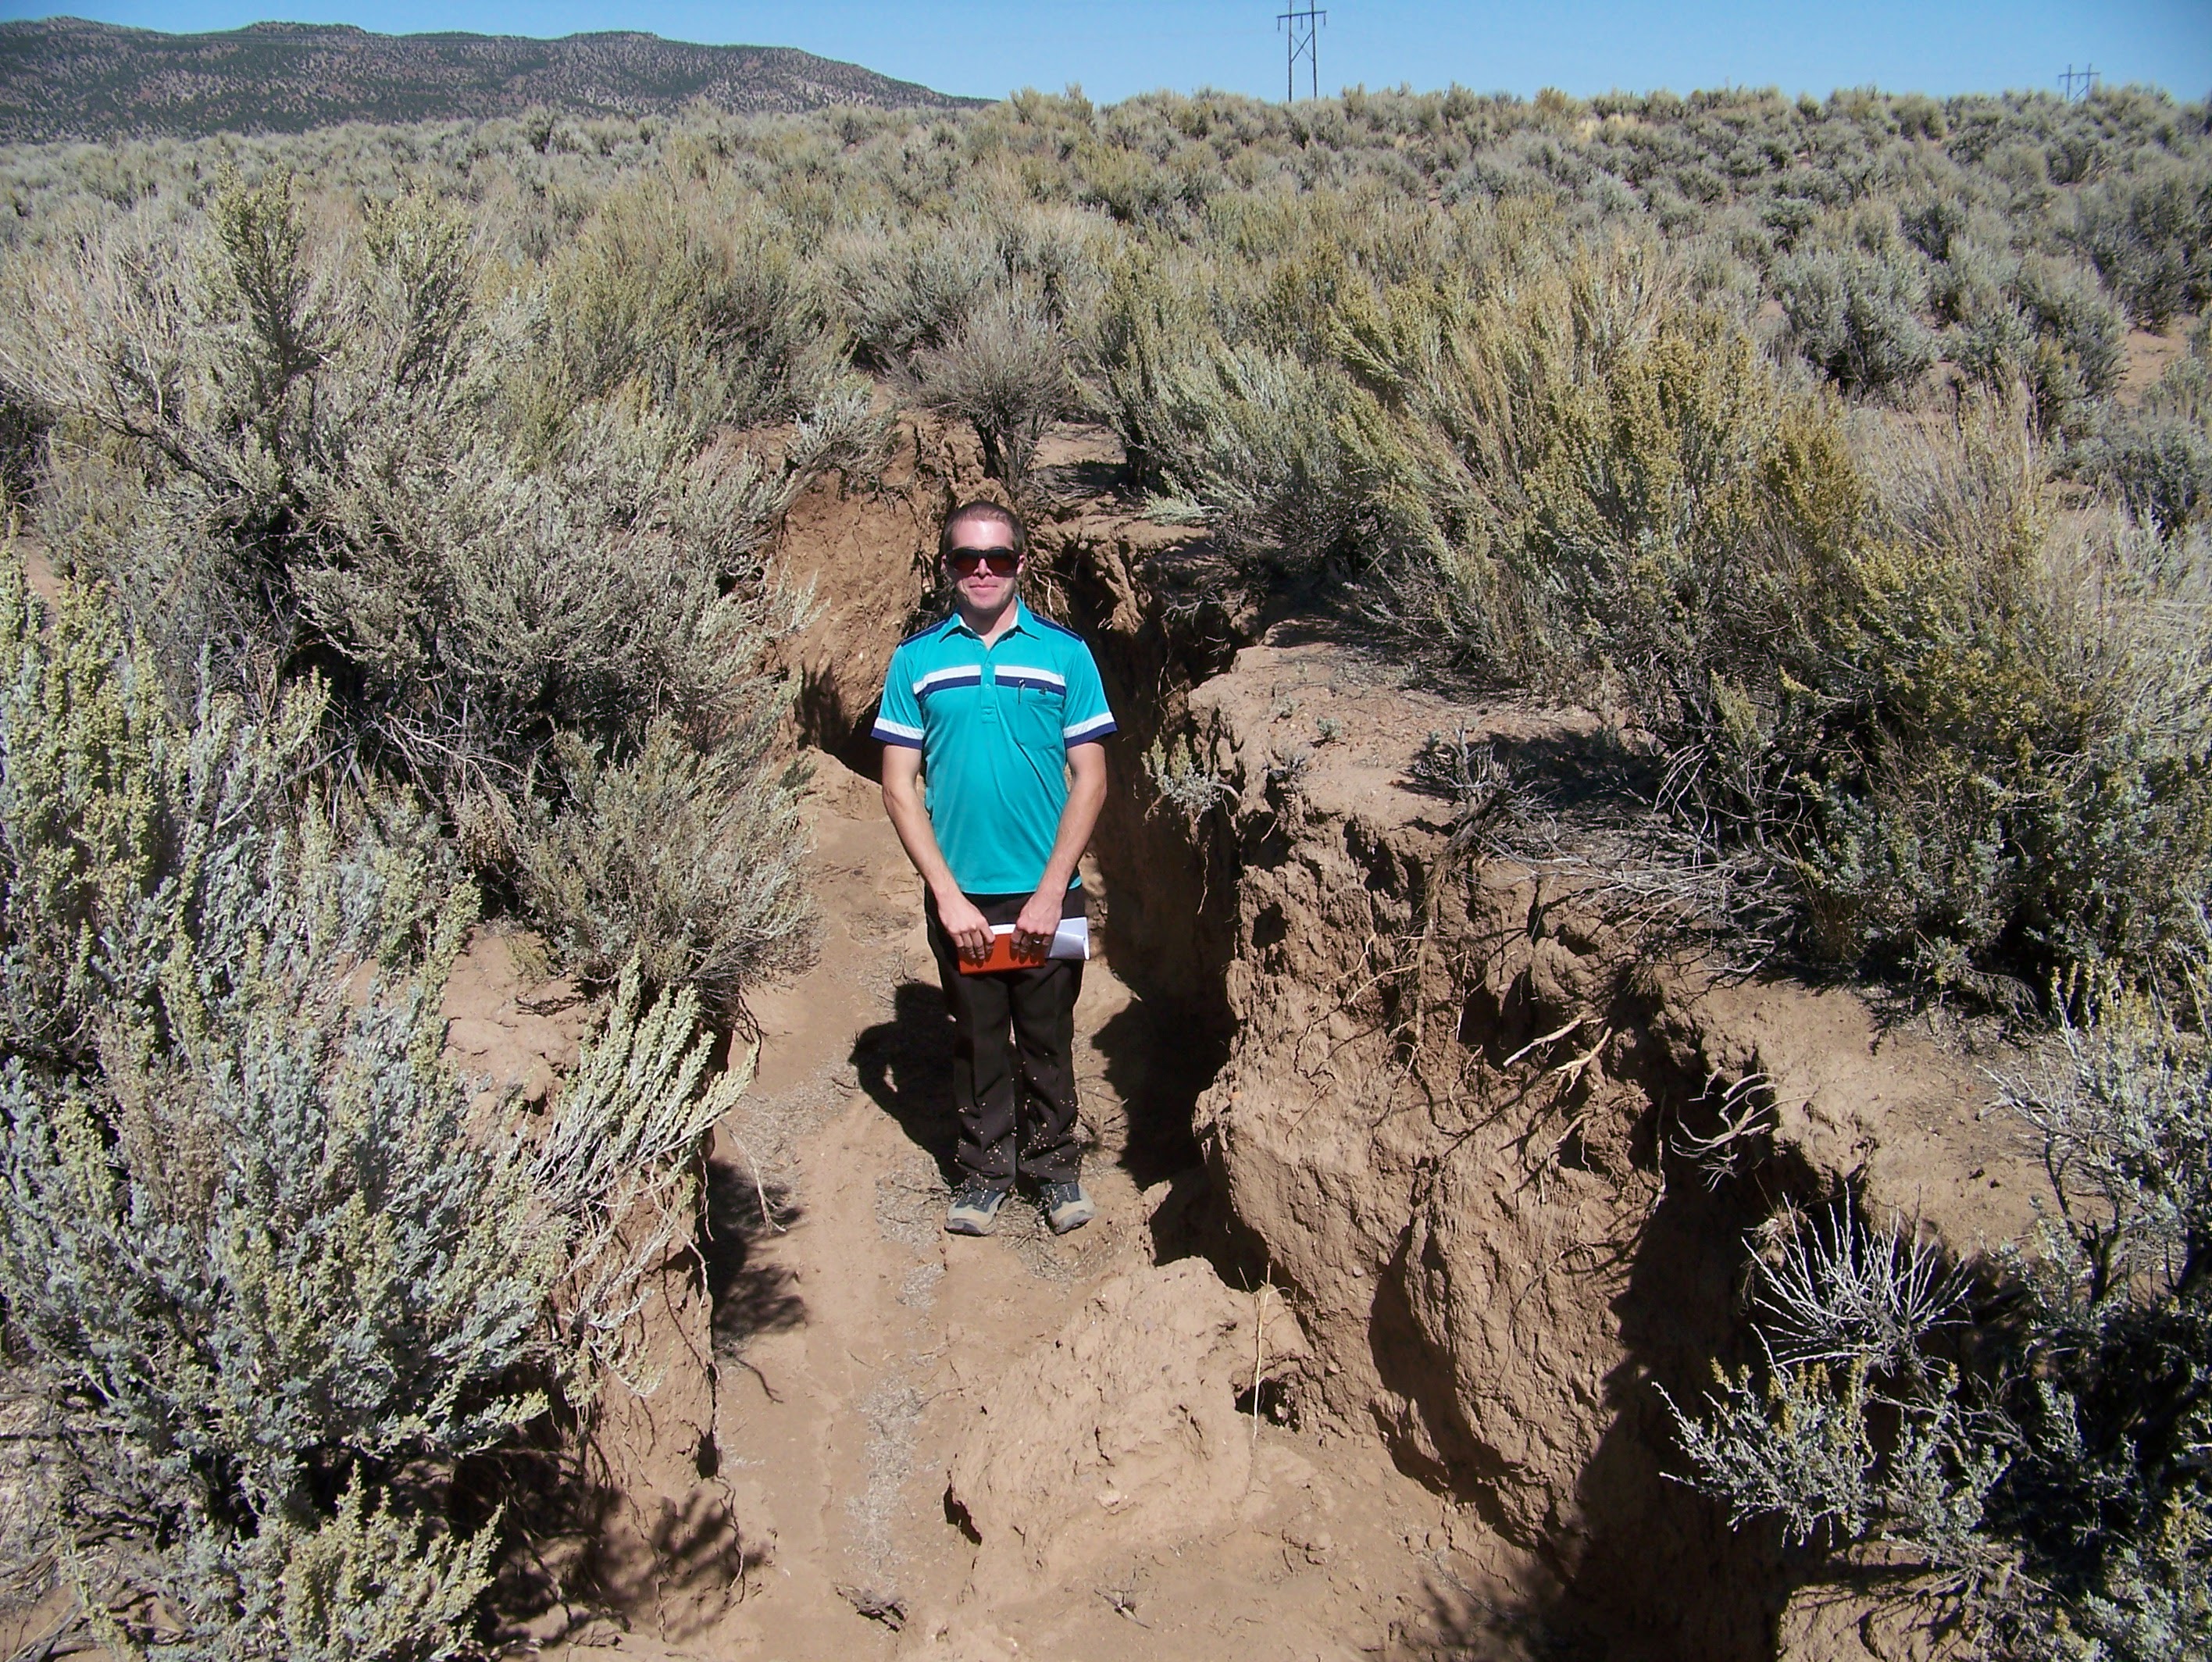 The author stands in a large ditch-like